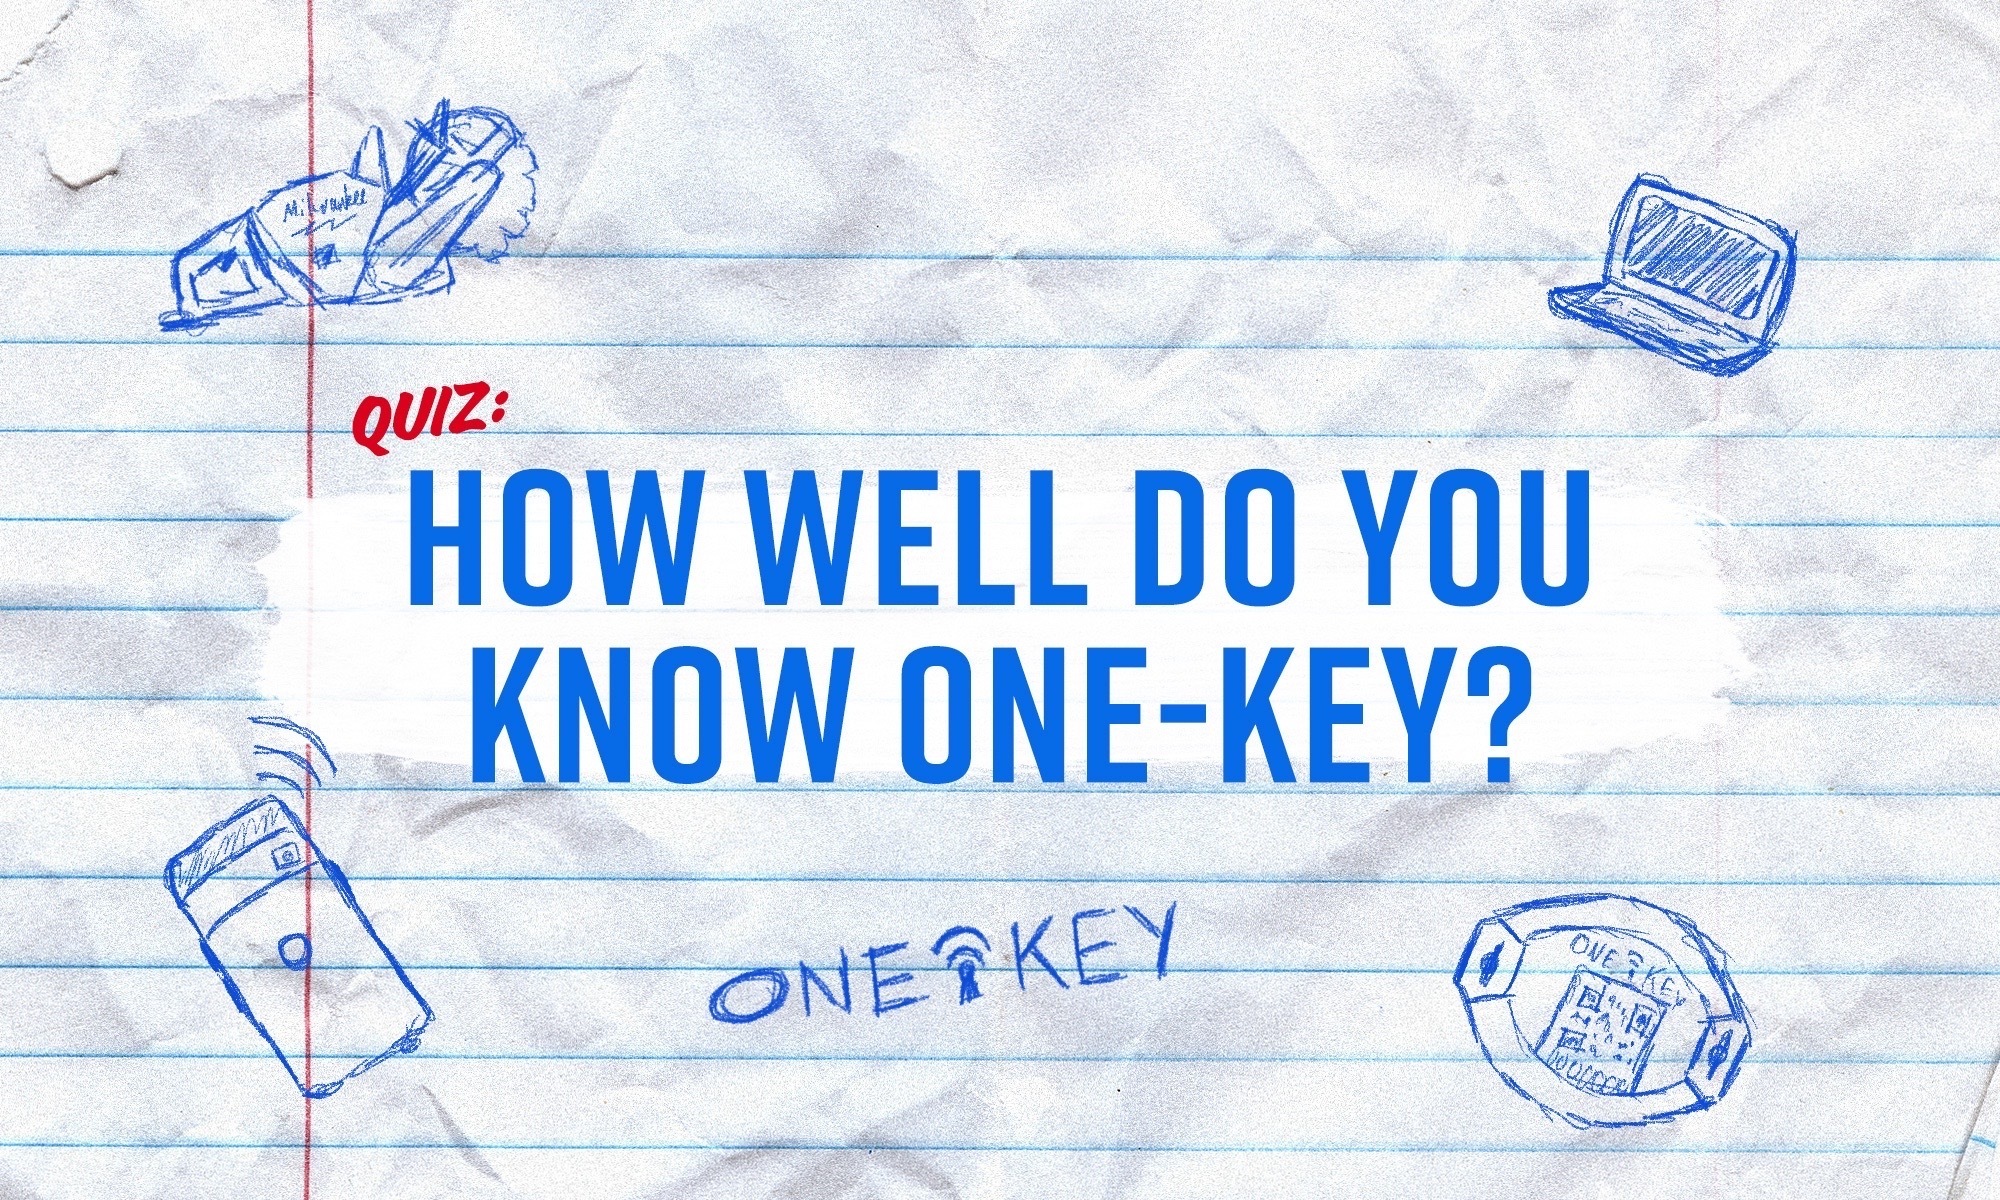 A notebook graphic for the One-Key knowledge quiz